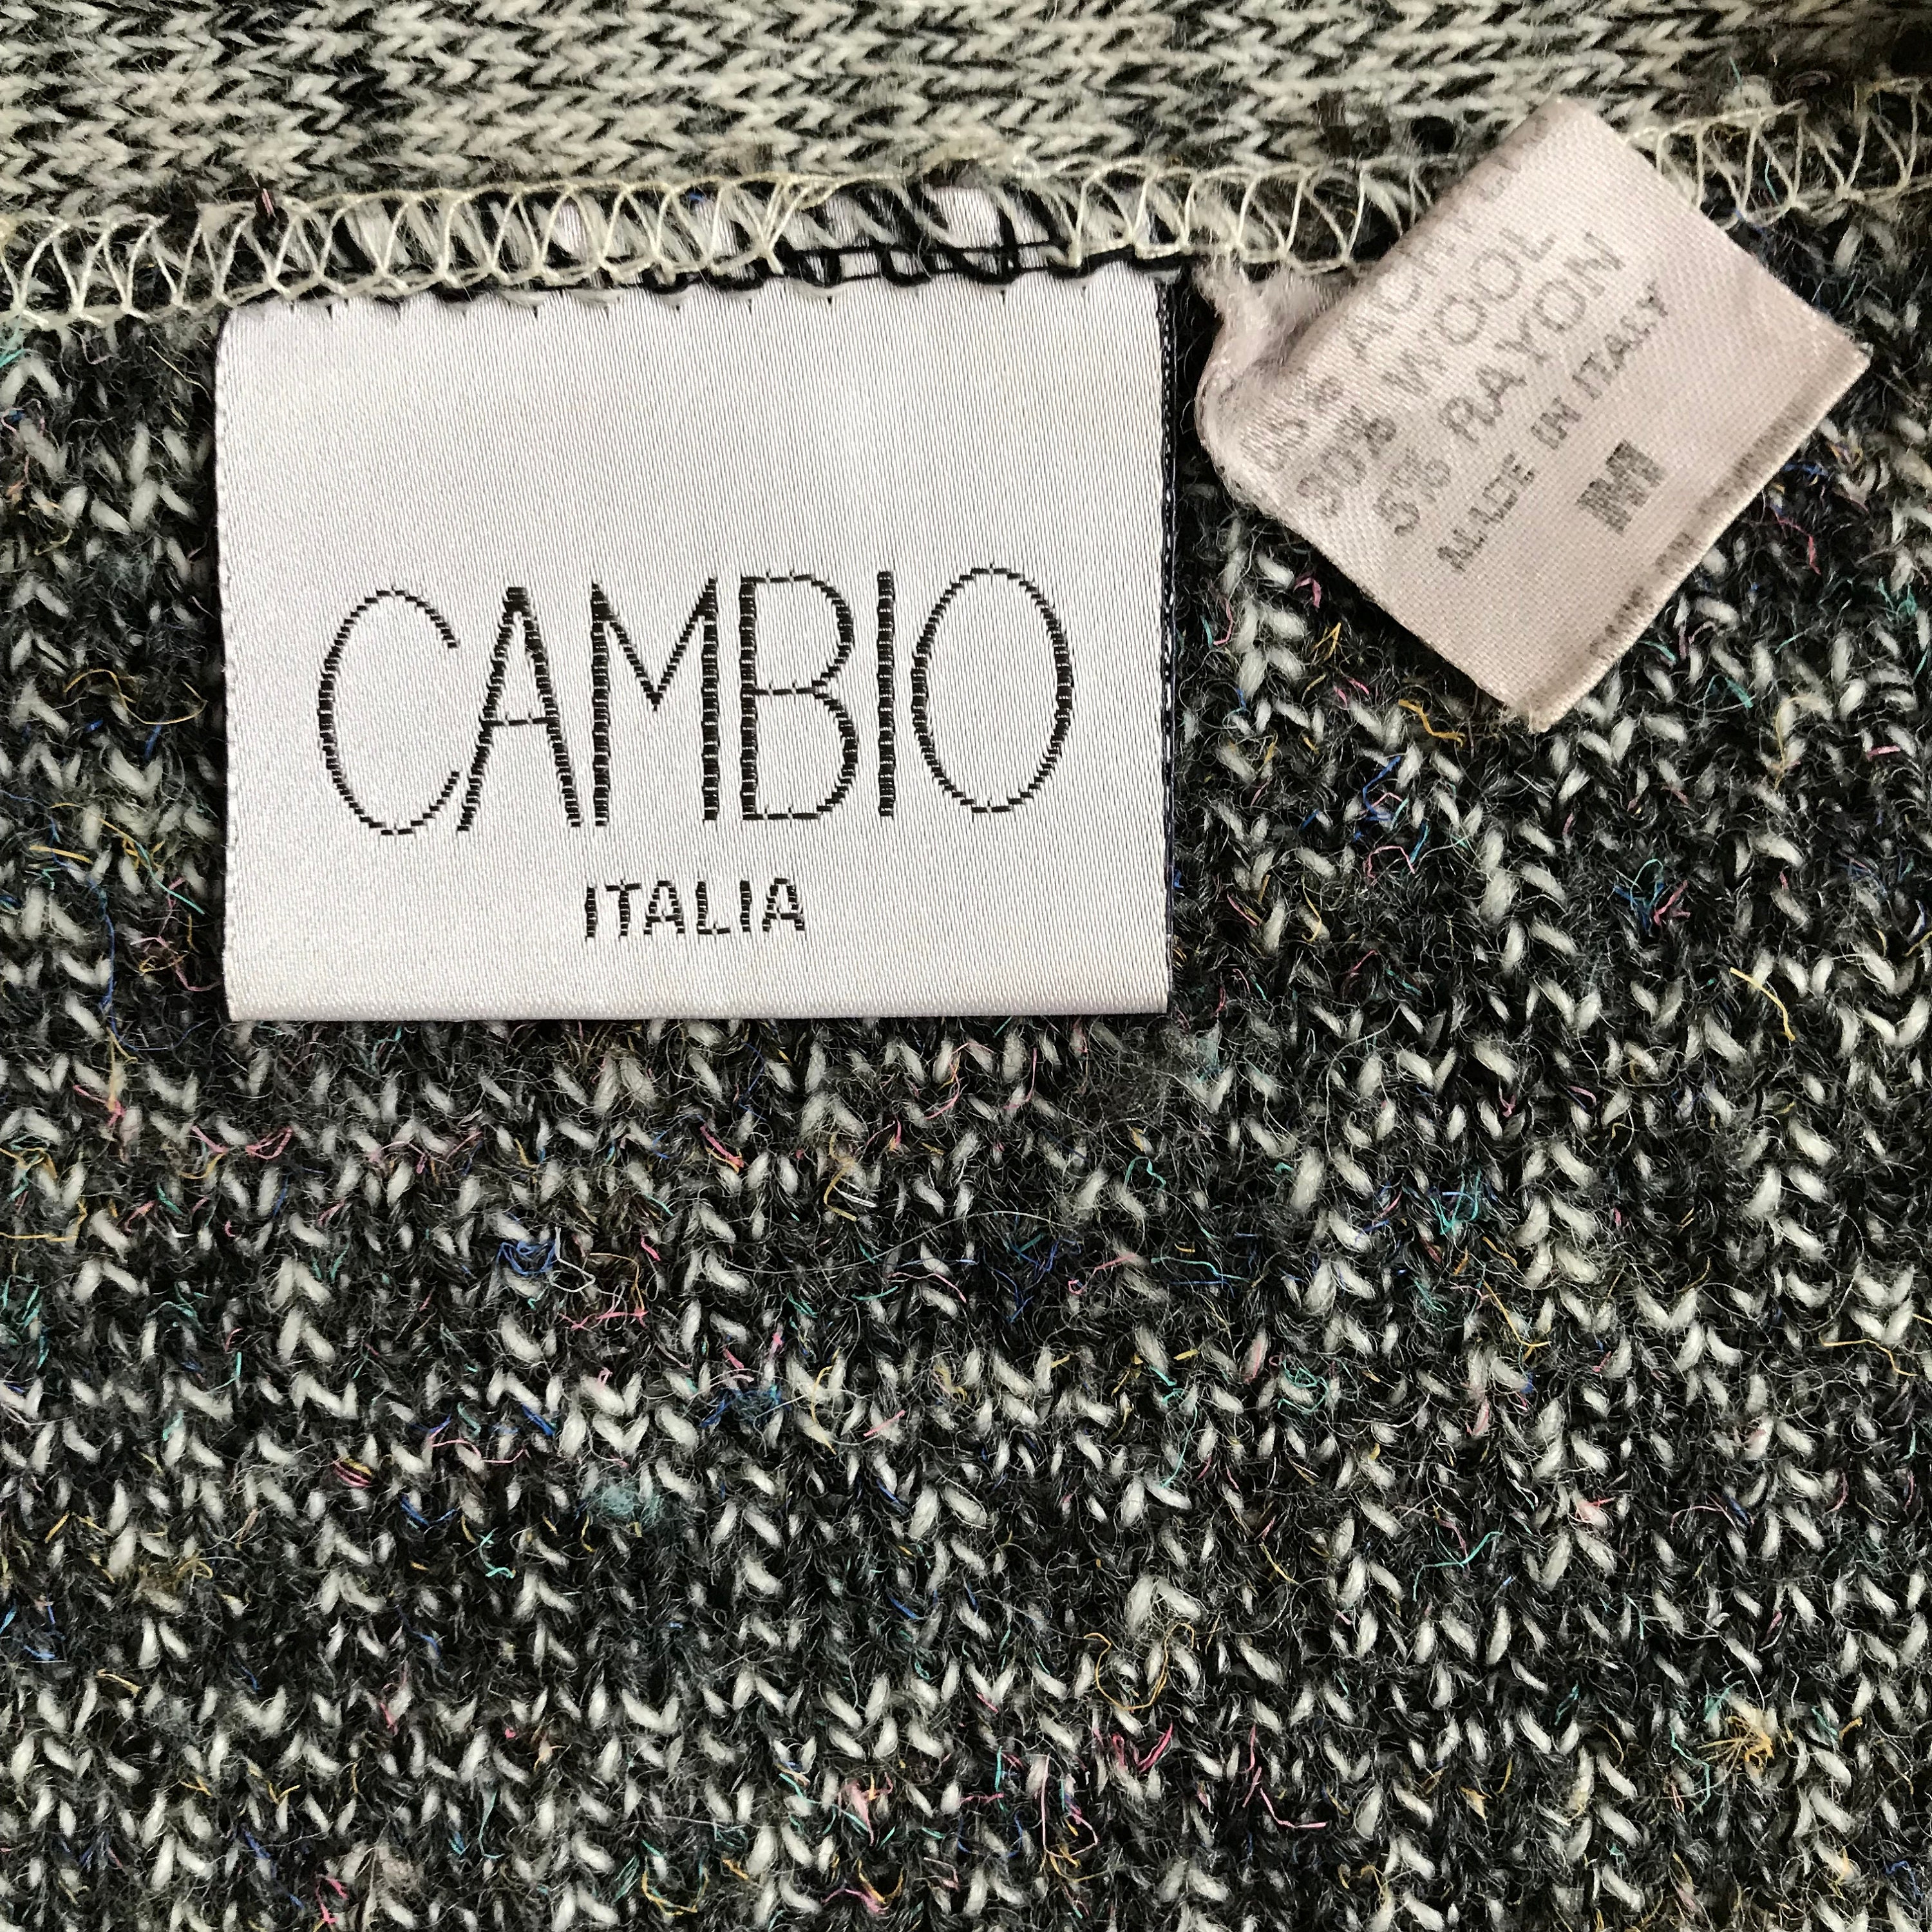 Vintage 90s Cambio Italia Black & Gray Wool Blend Cardigan Sweater  Made in Italy  Unisex Adult Size Medium to Large  Free US Shipping